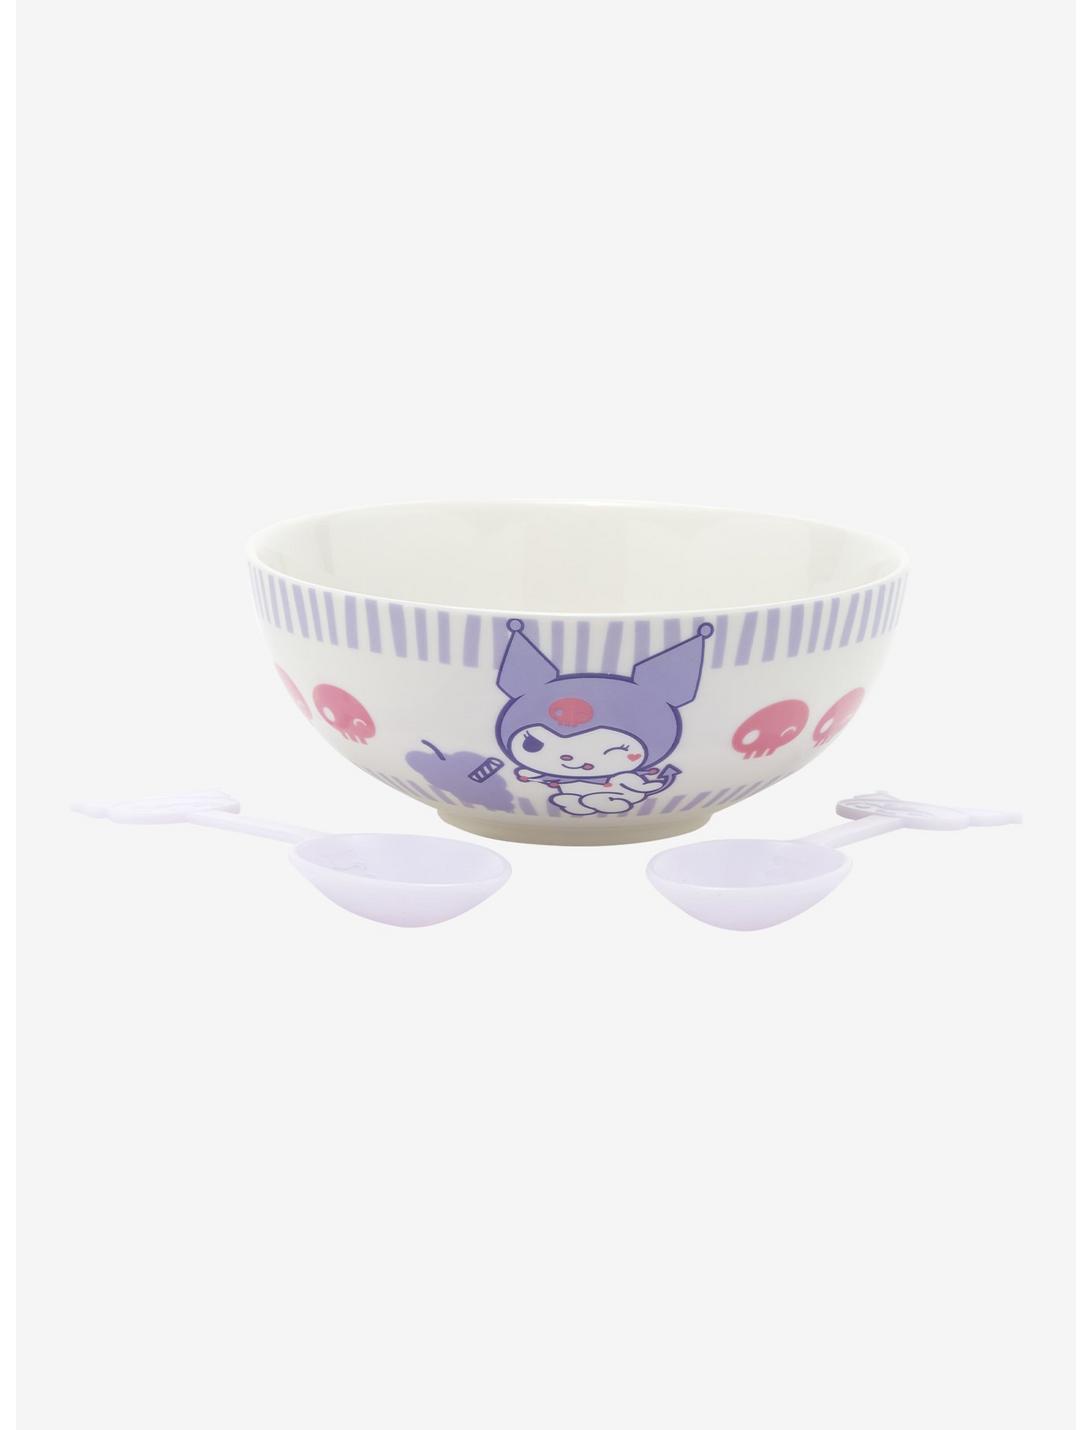 Kuromi Cereal Bowl & Color-Changing Spoons Set Hot Topic Exclusive, , hi-res